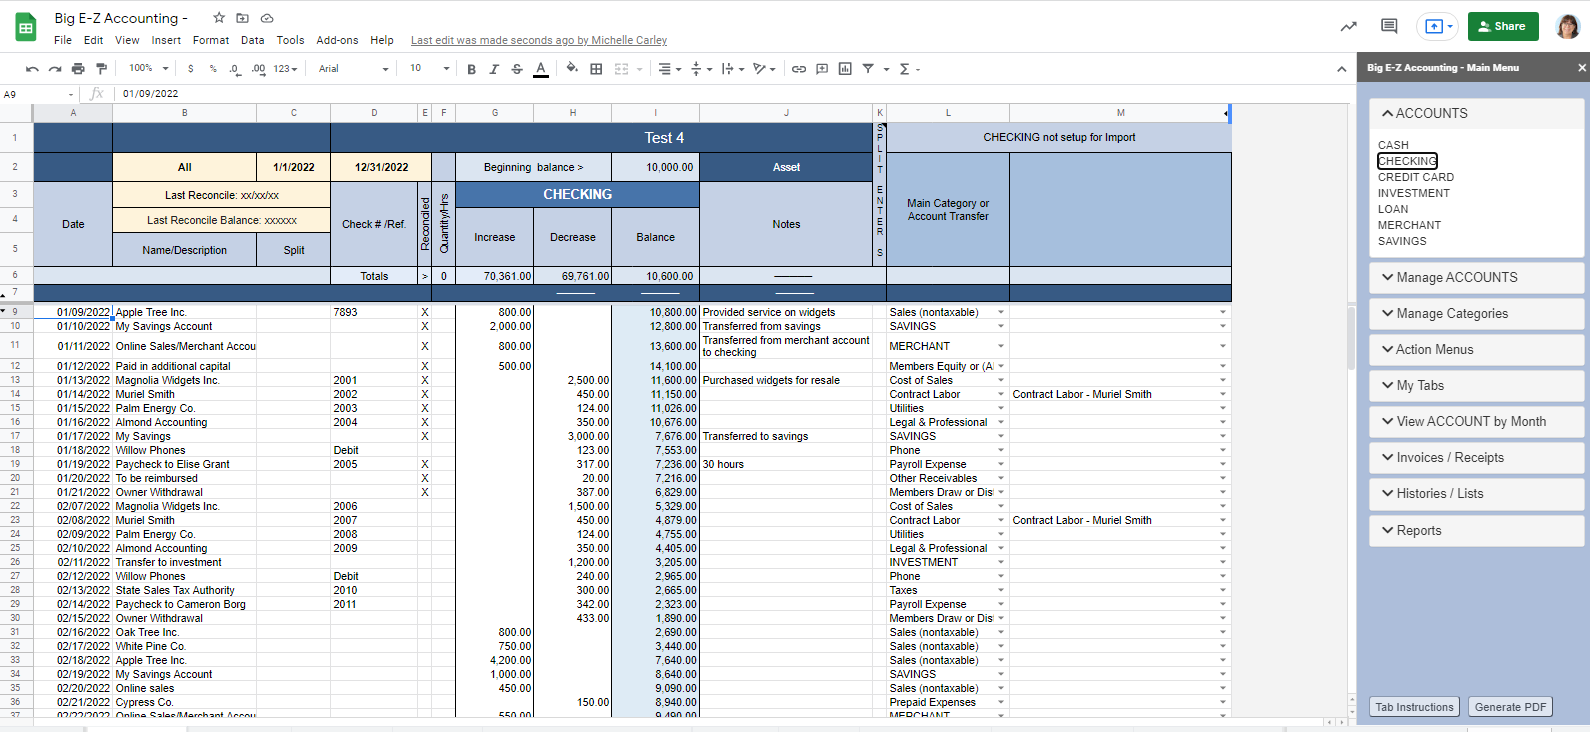 Big E-Z Accounting for Google Sheets Logiciel - 1